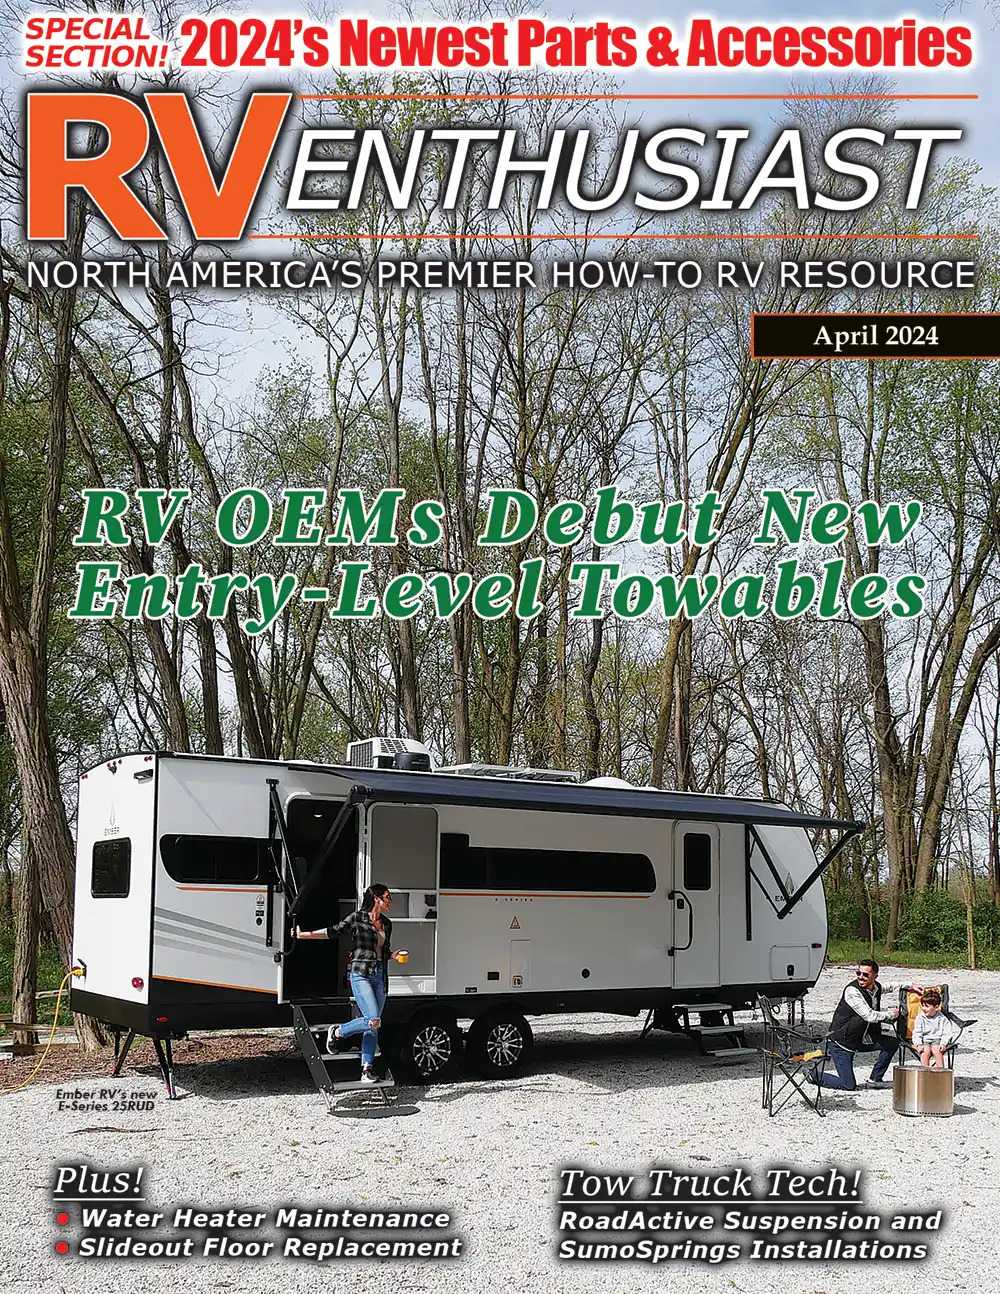 RV Enthusiast April 2024 cover